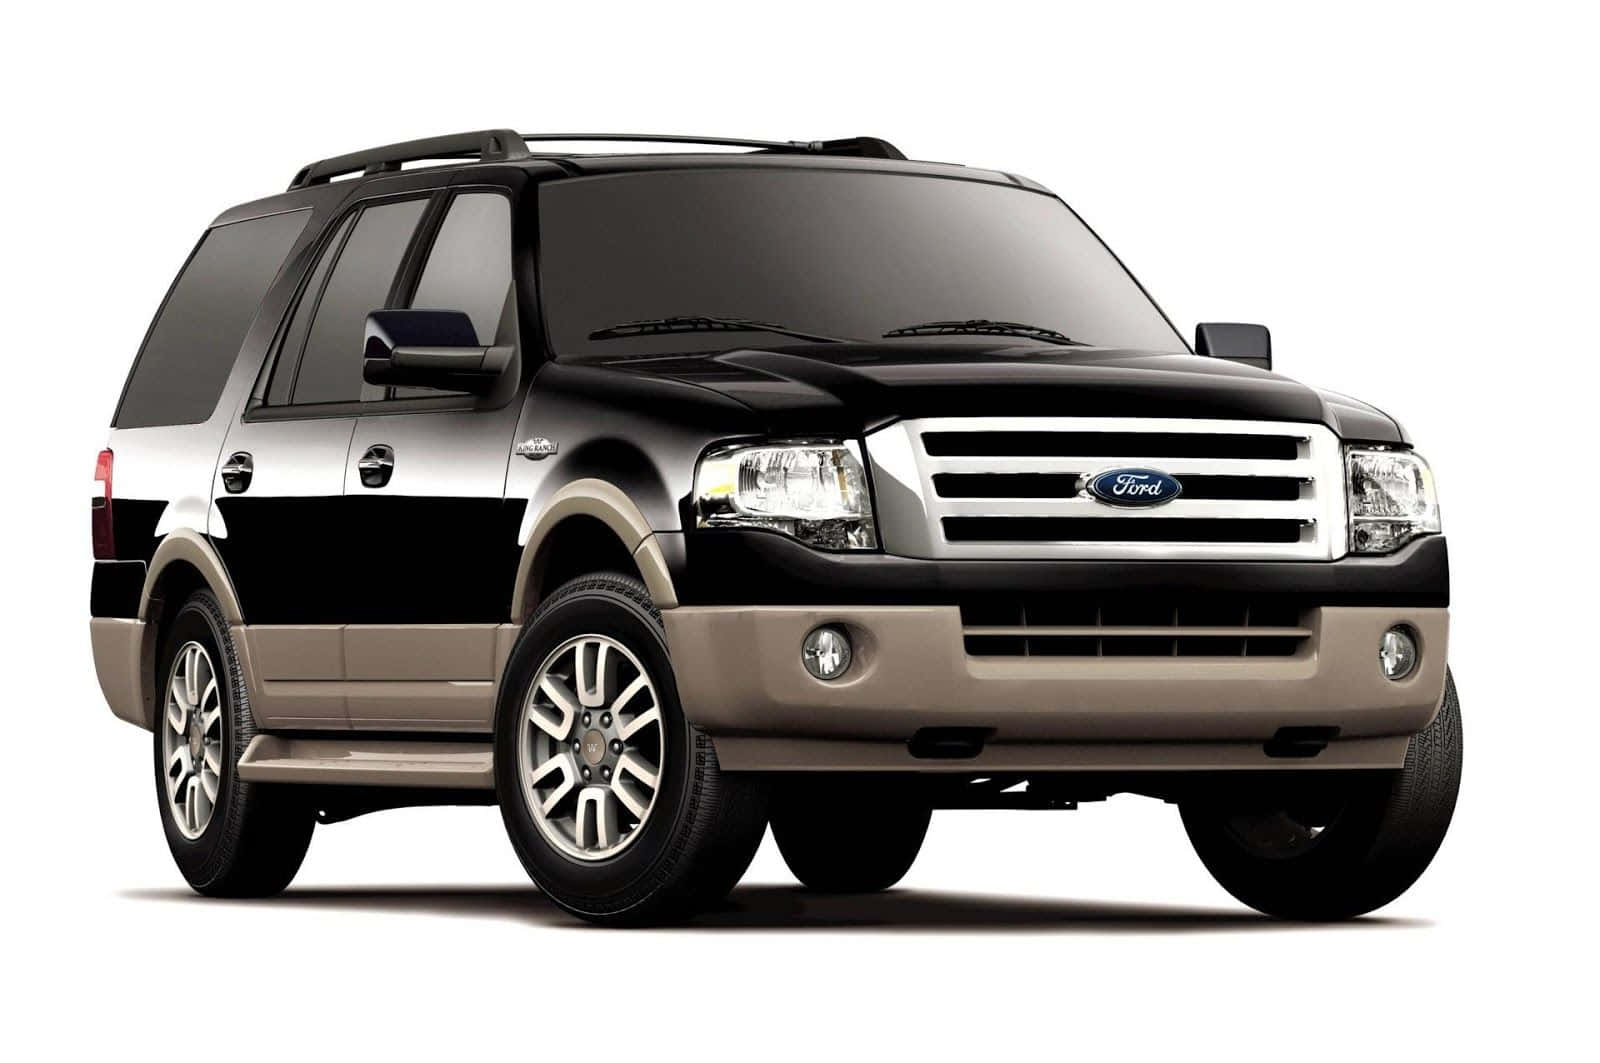 Sleek Ford Expedition cruising in a picturesque landscape Wallpaper